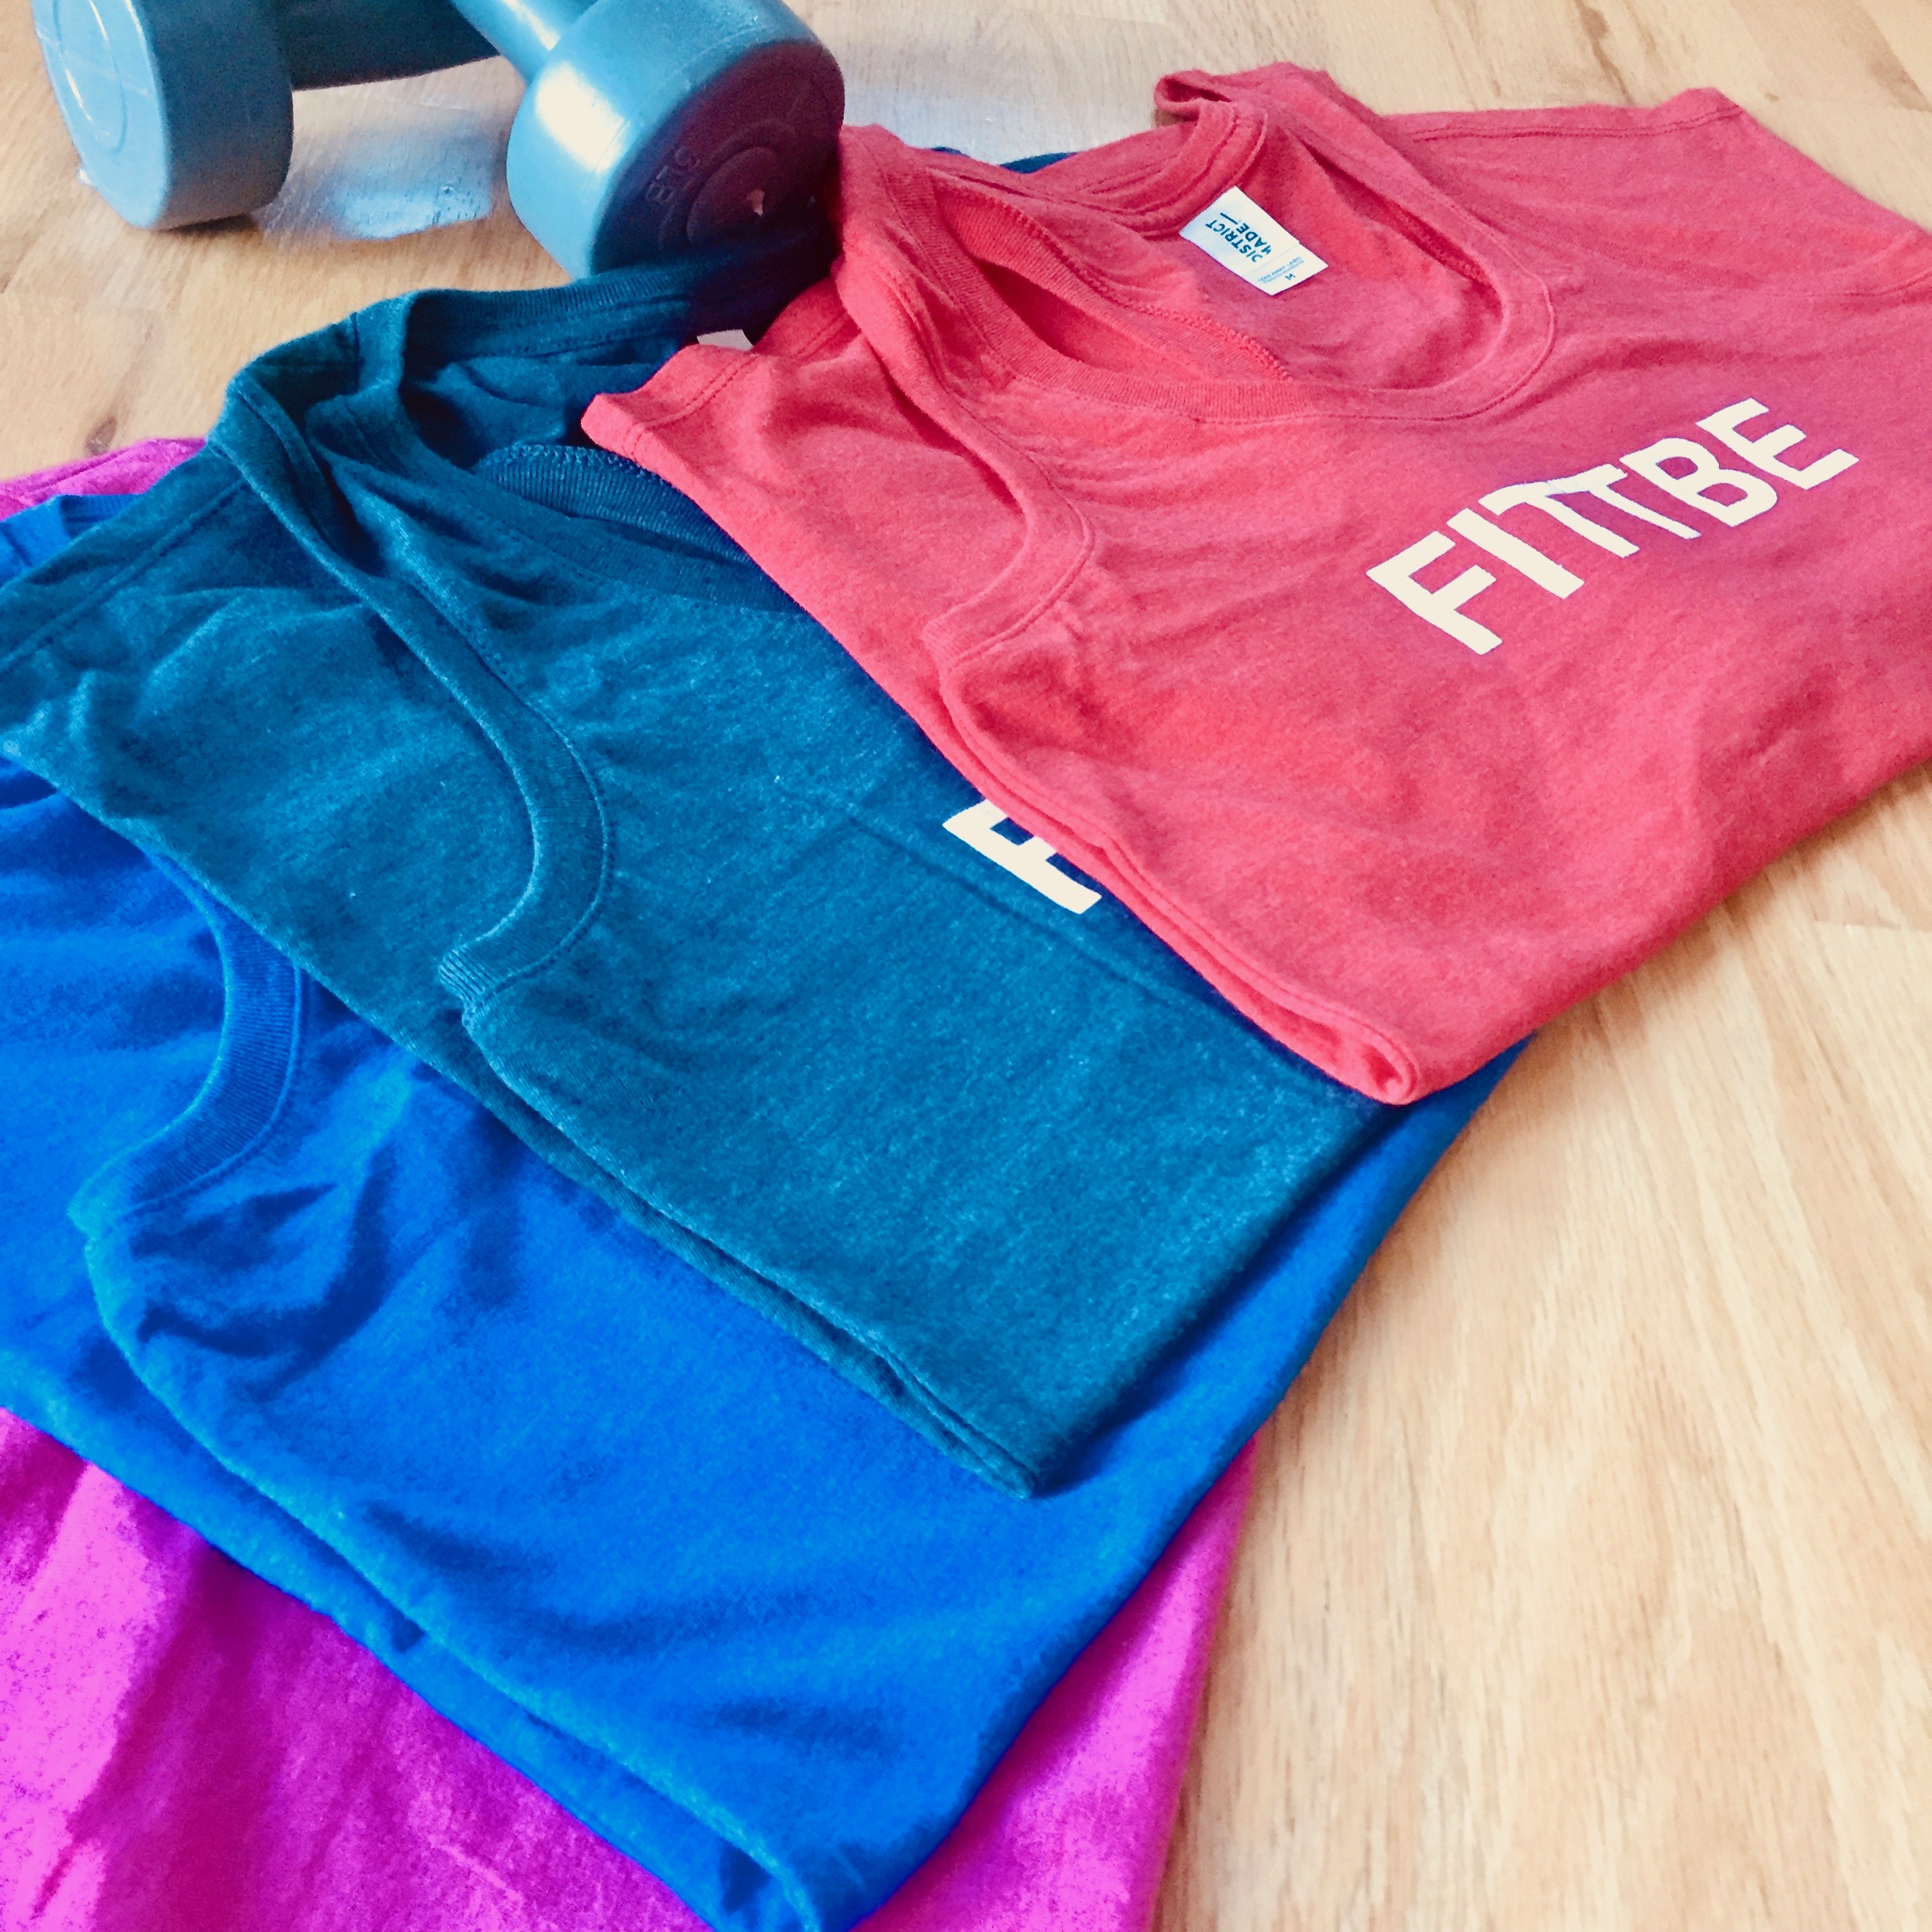 Win A Fittbe Tank: It’s Contest Time Again!